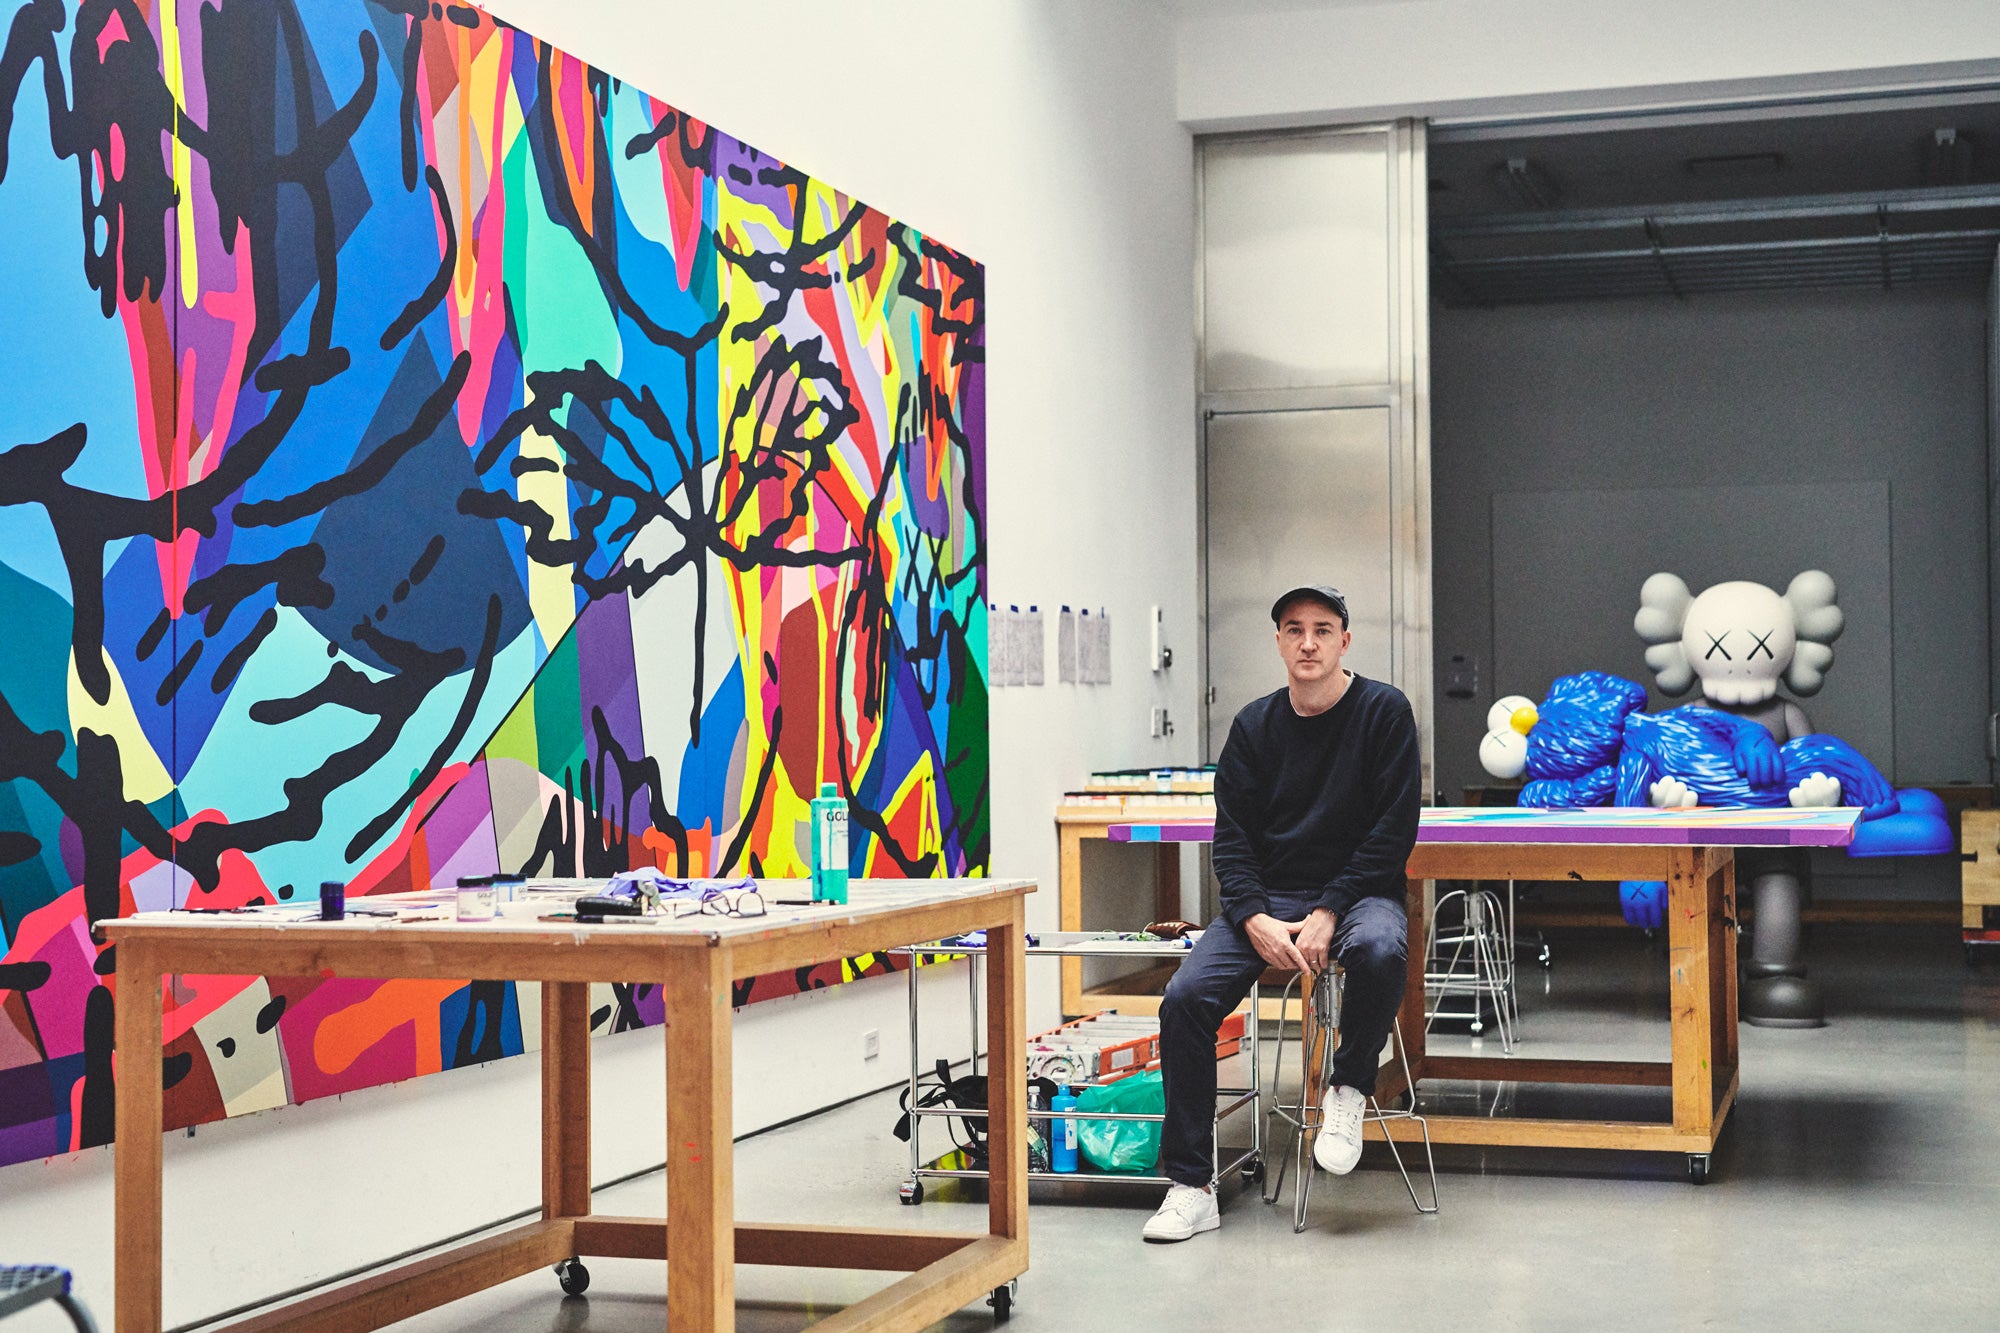 KAWS artist in his studio with paintings and sculpture